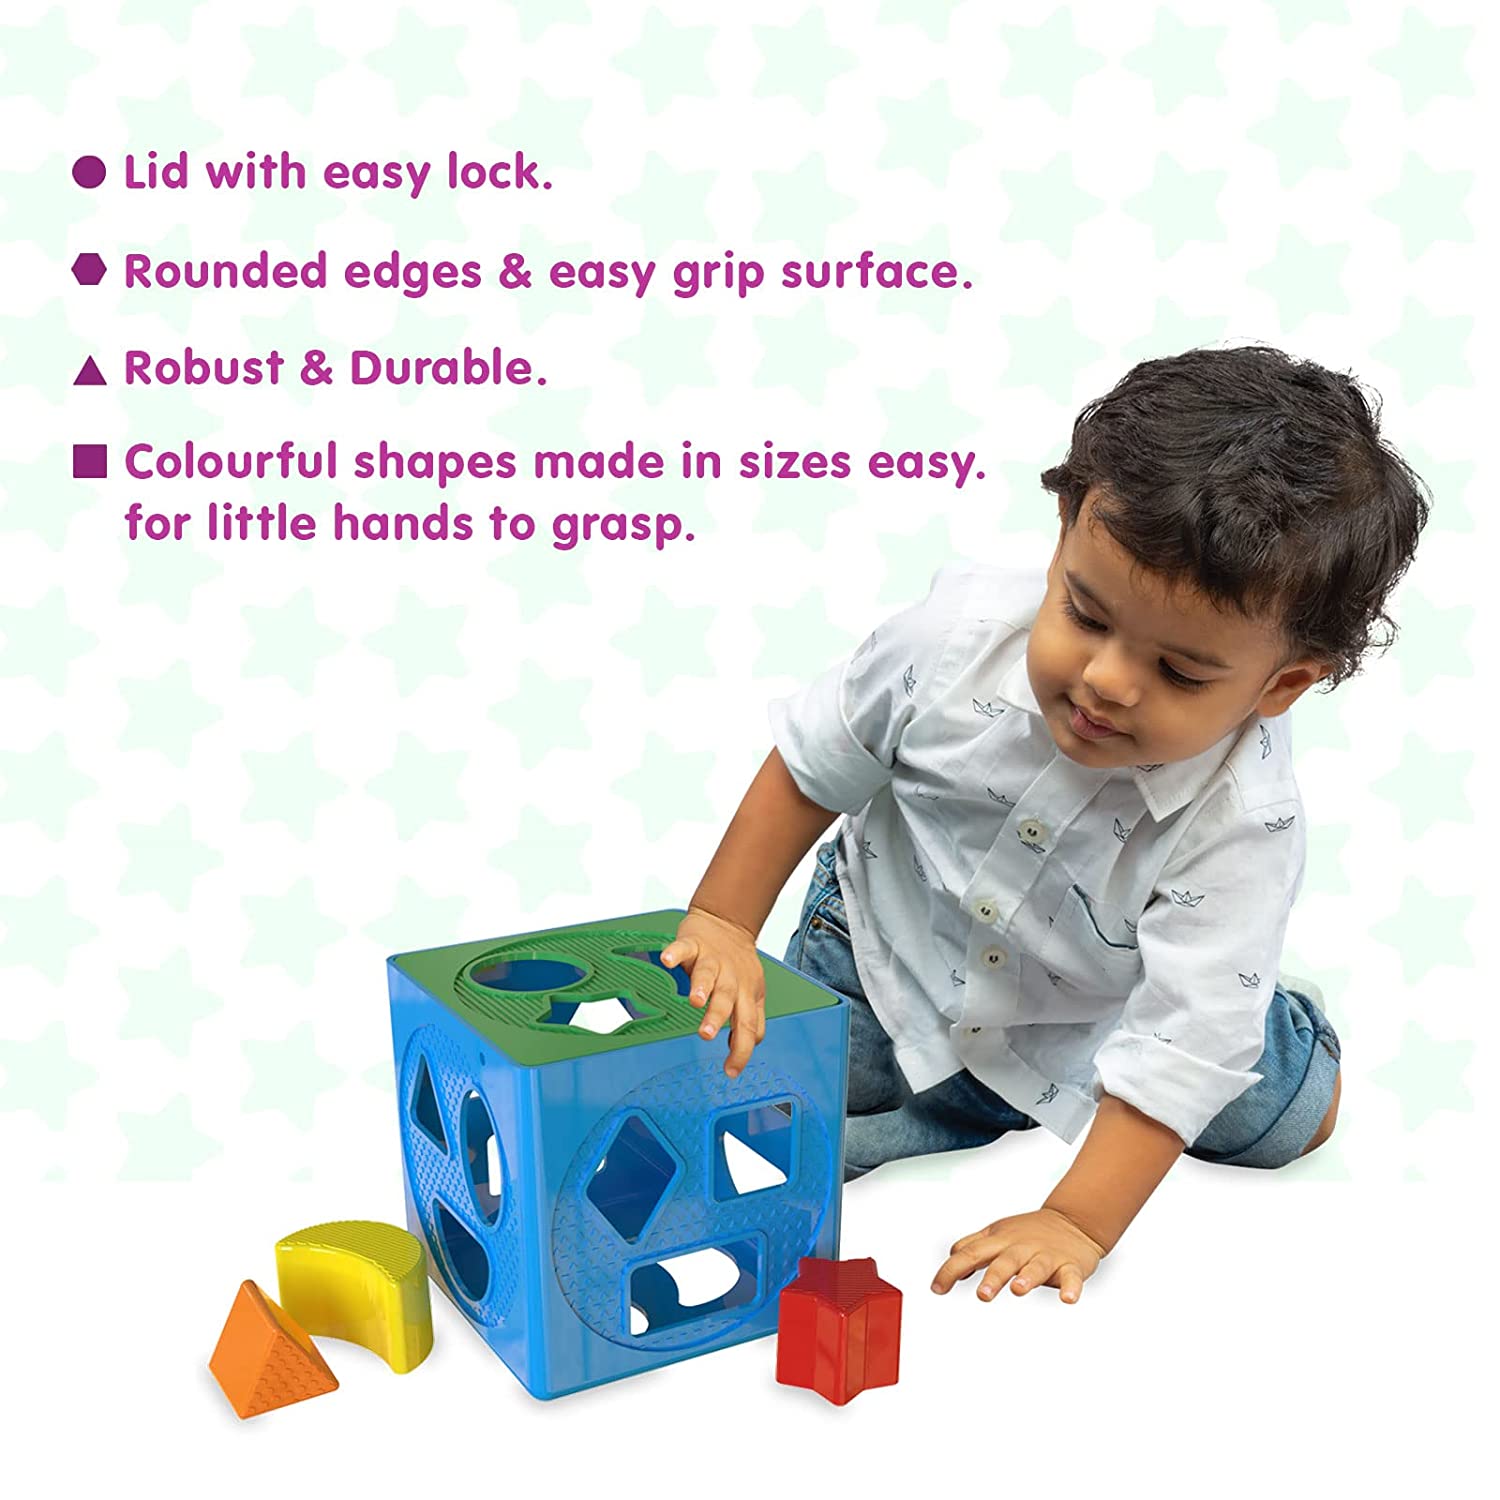 Funskool Giggles- 2 in 1 Shape Sorting Cube and Aeroplane Pull Along Toy Giftset for Toddlers